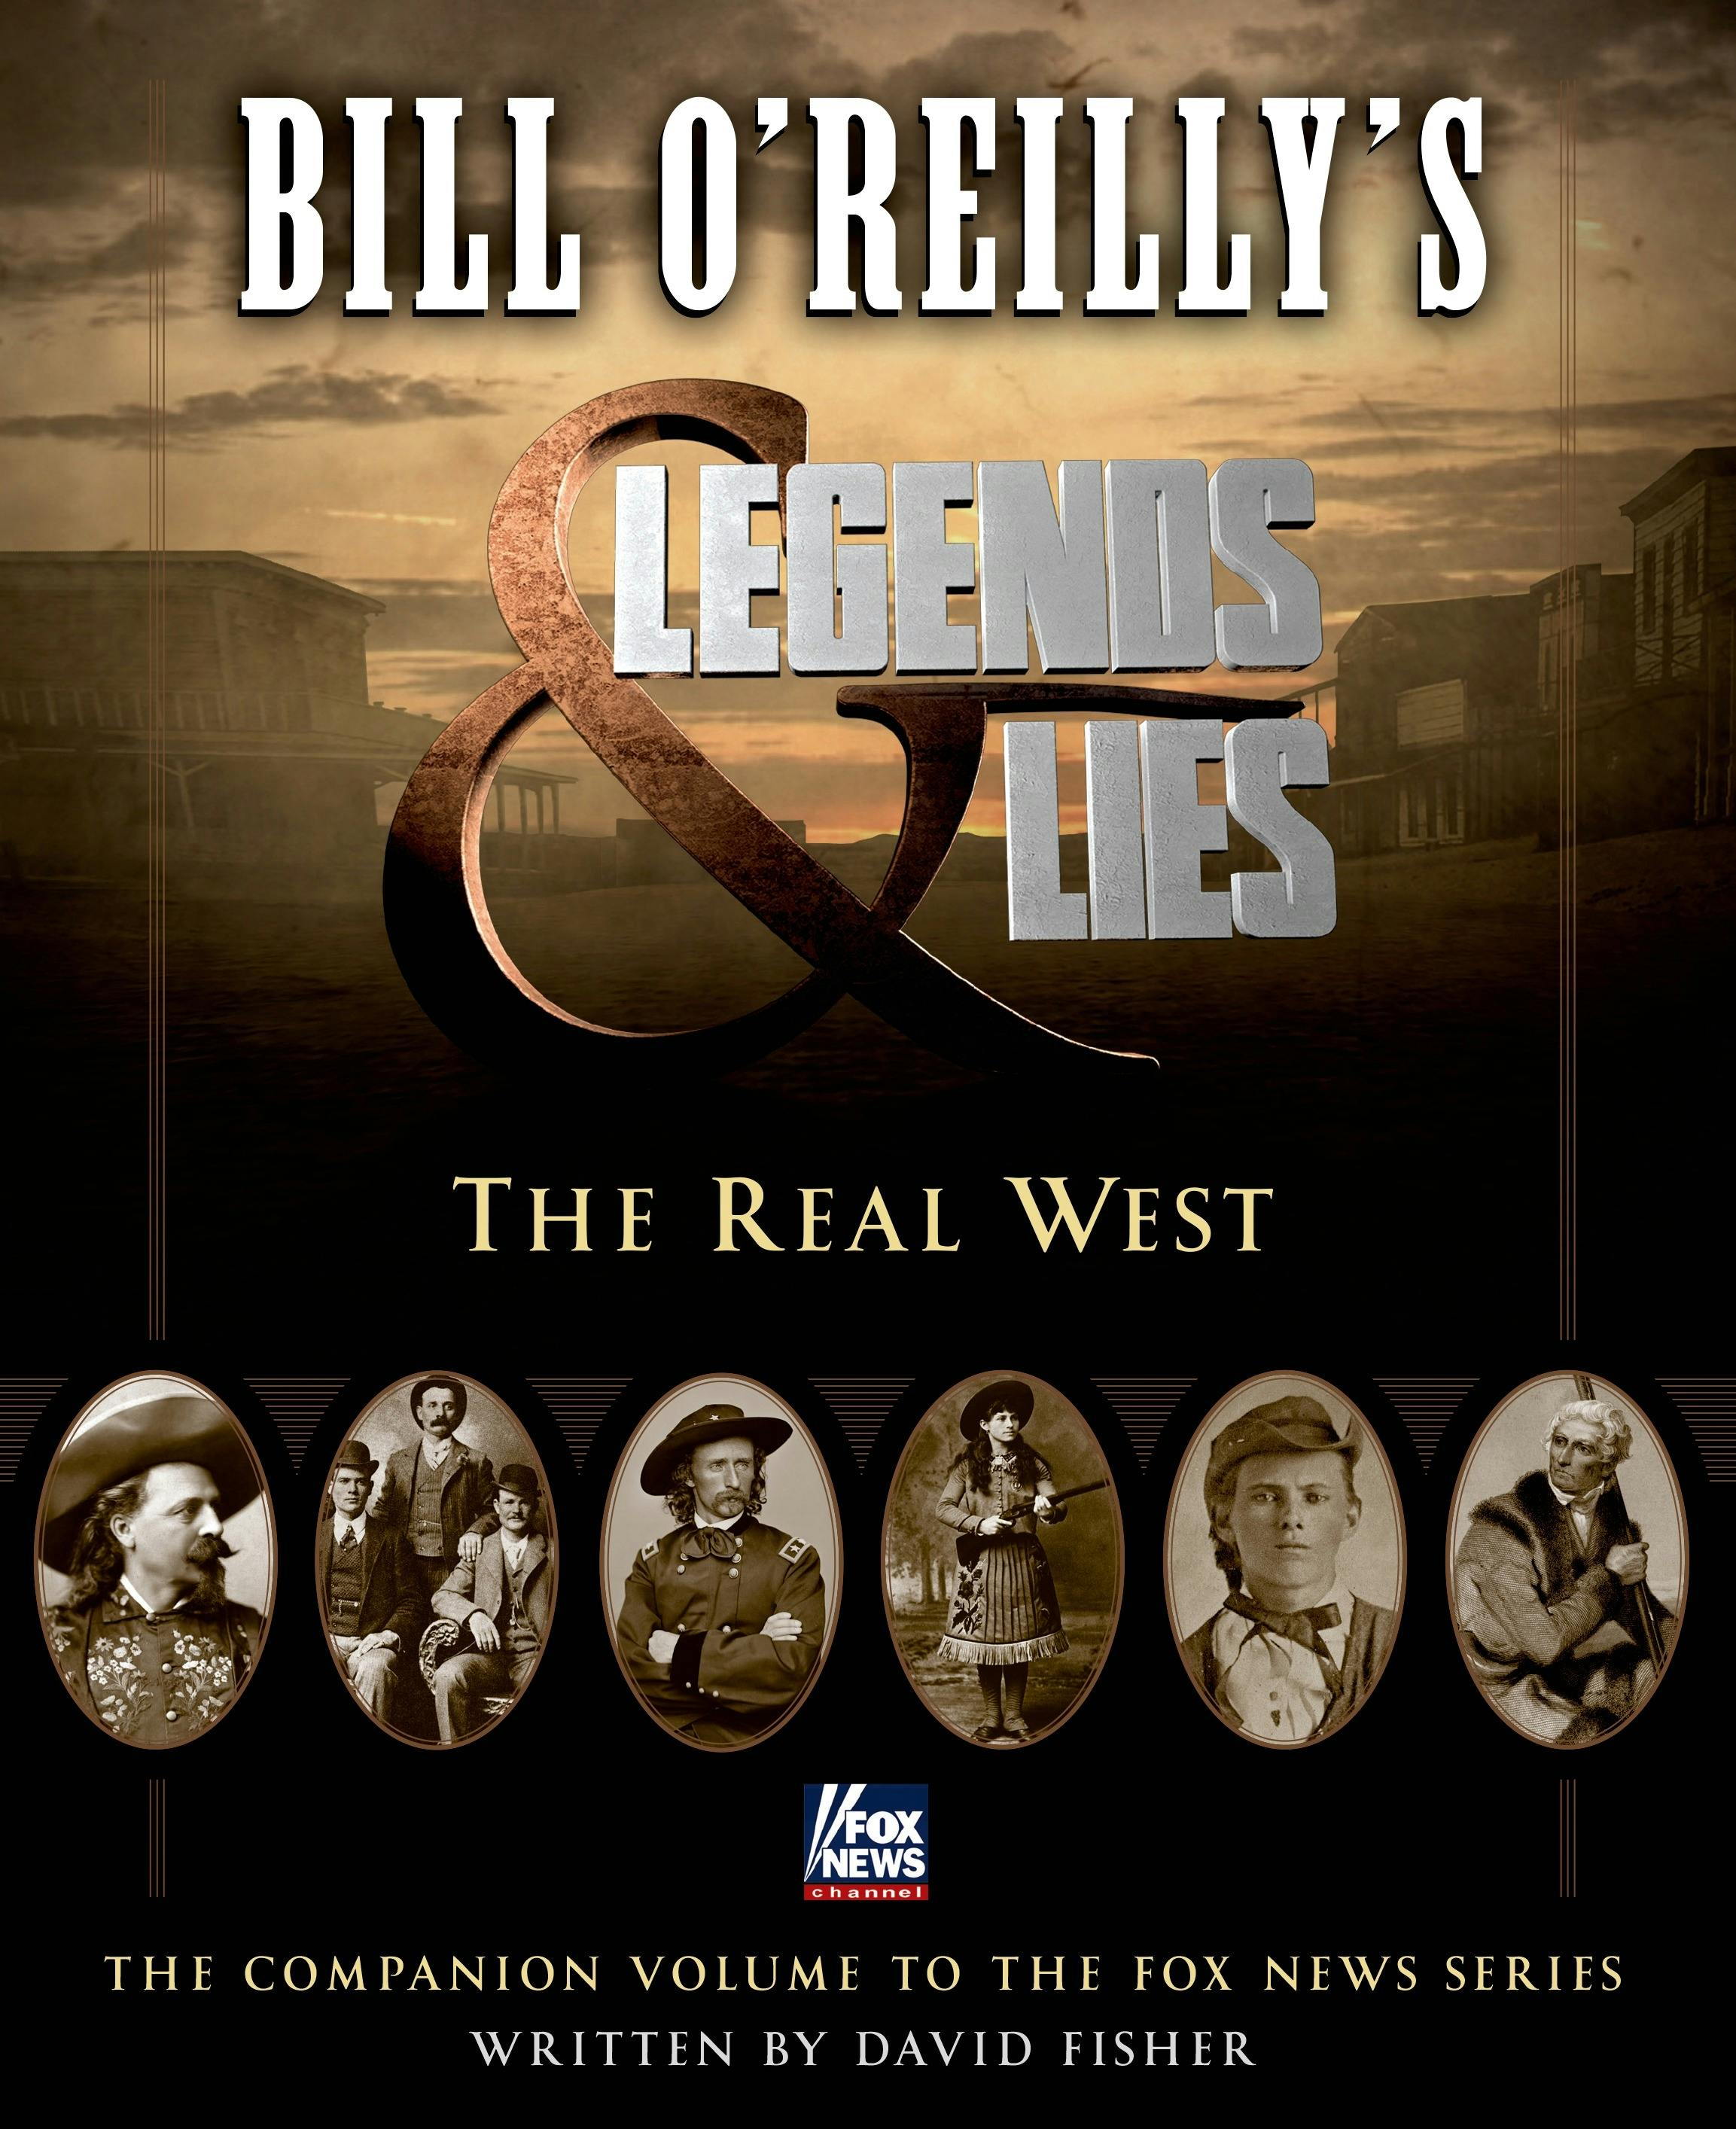 Image of Bill O'Reilly's Legends and Lies: The Real West